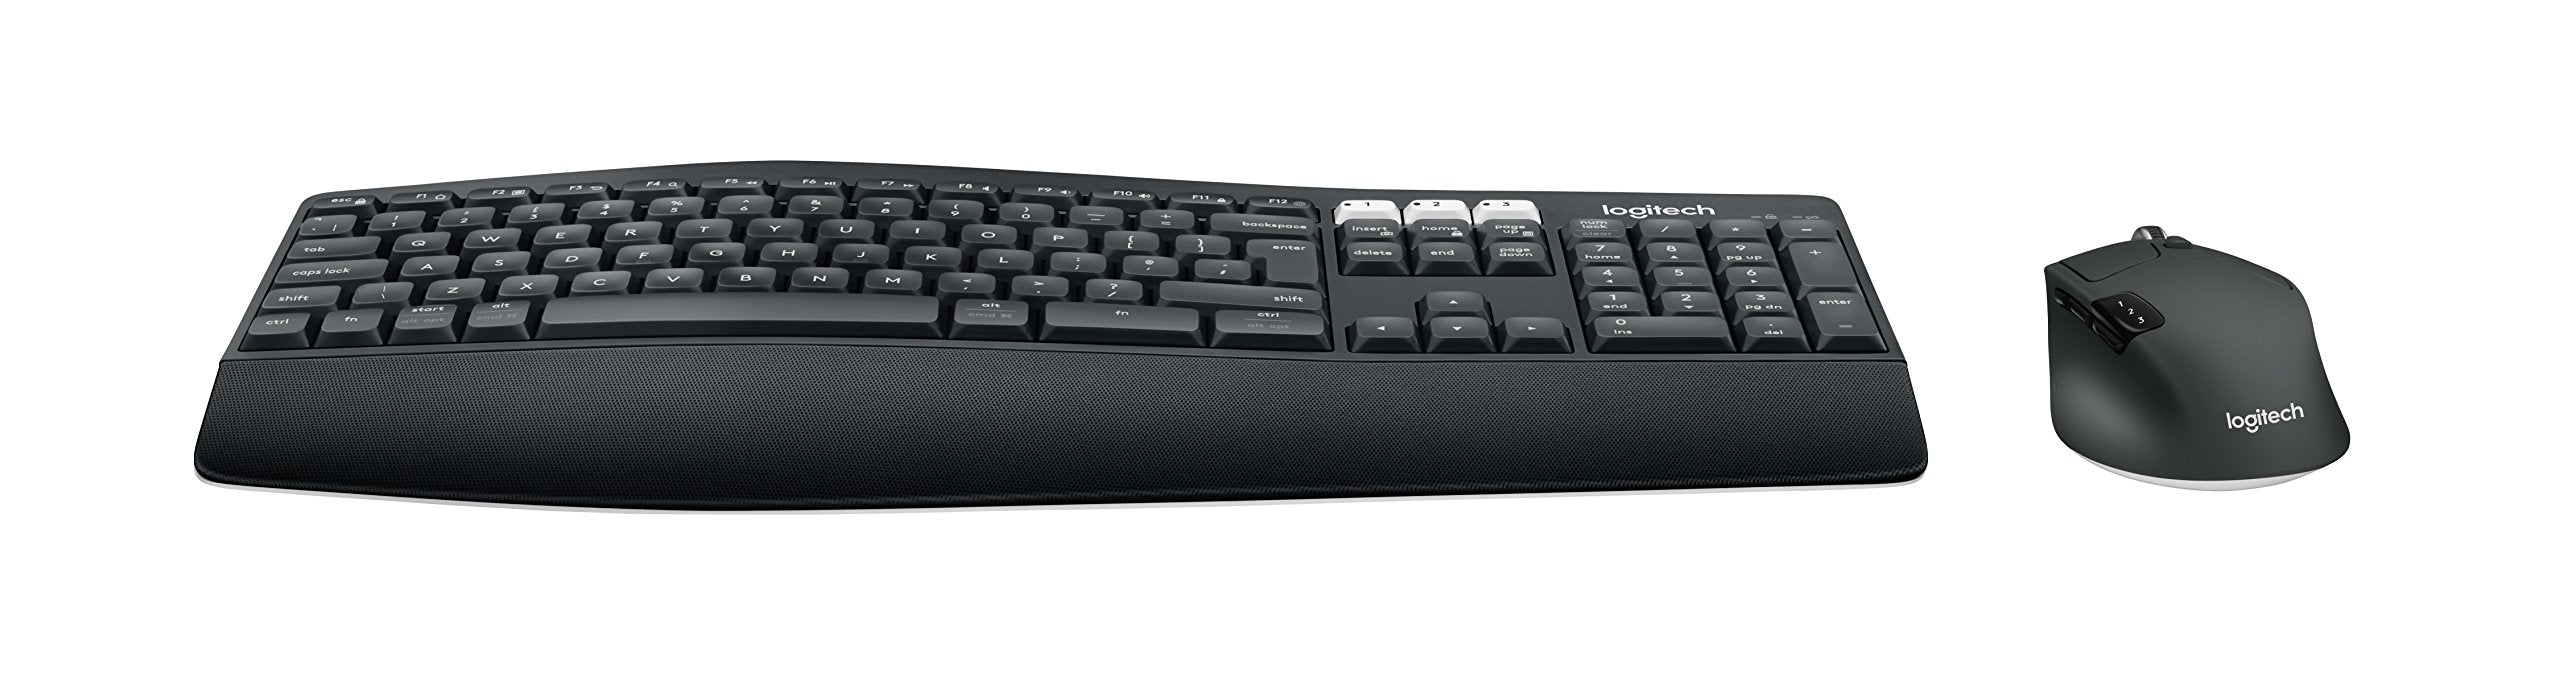 Logitech Wireless Keyboard and Mouse Combo for Windows, 2.4 GHz Wireless,  Compact Mouse, 8 Multimedia and Shortcut Keys, 2-Year Battery Life, for PC,  Laptop 